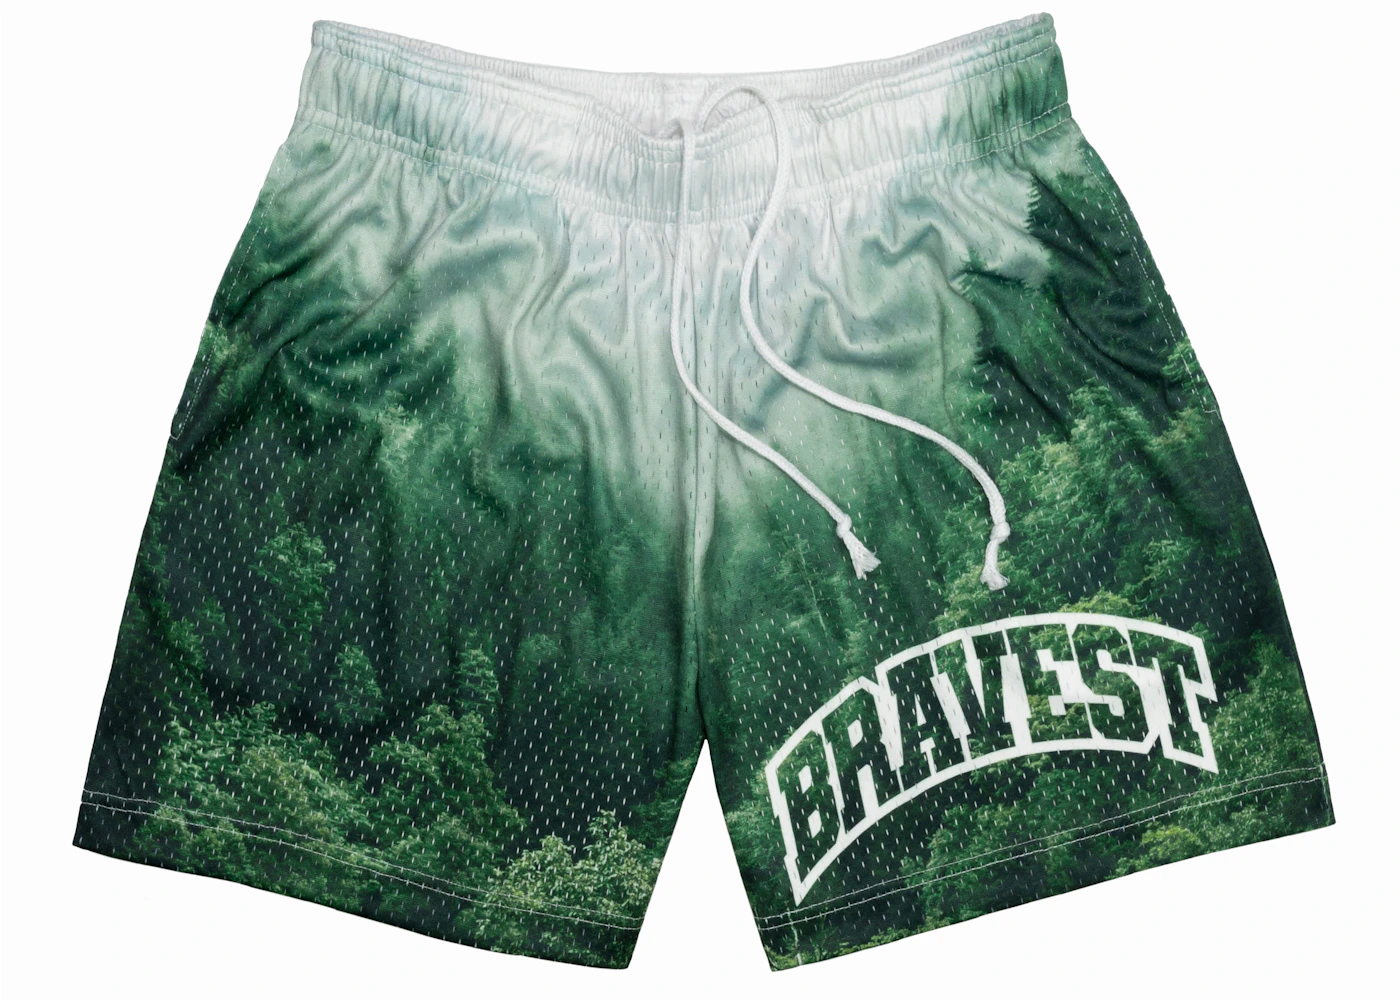 BRAVEST STUDIOS STATUE OF LIBERTY SHORTS - SIZE: LARGE - BRAND NEW- IN HAND  NEW